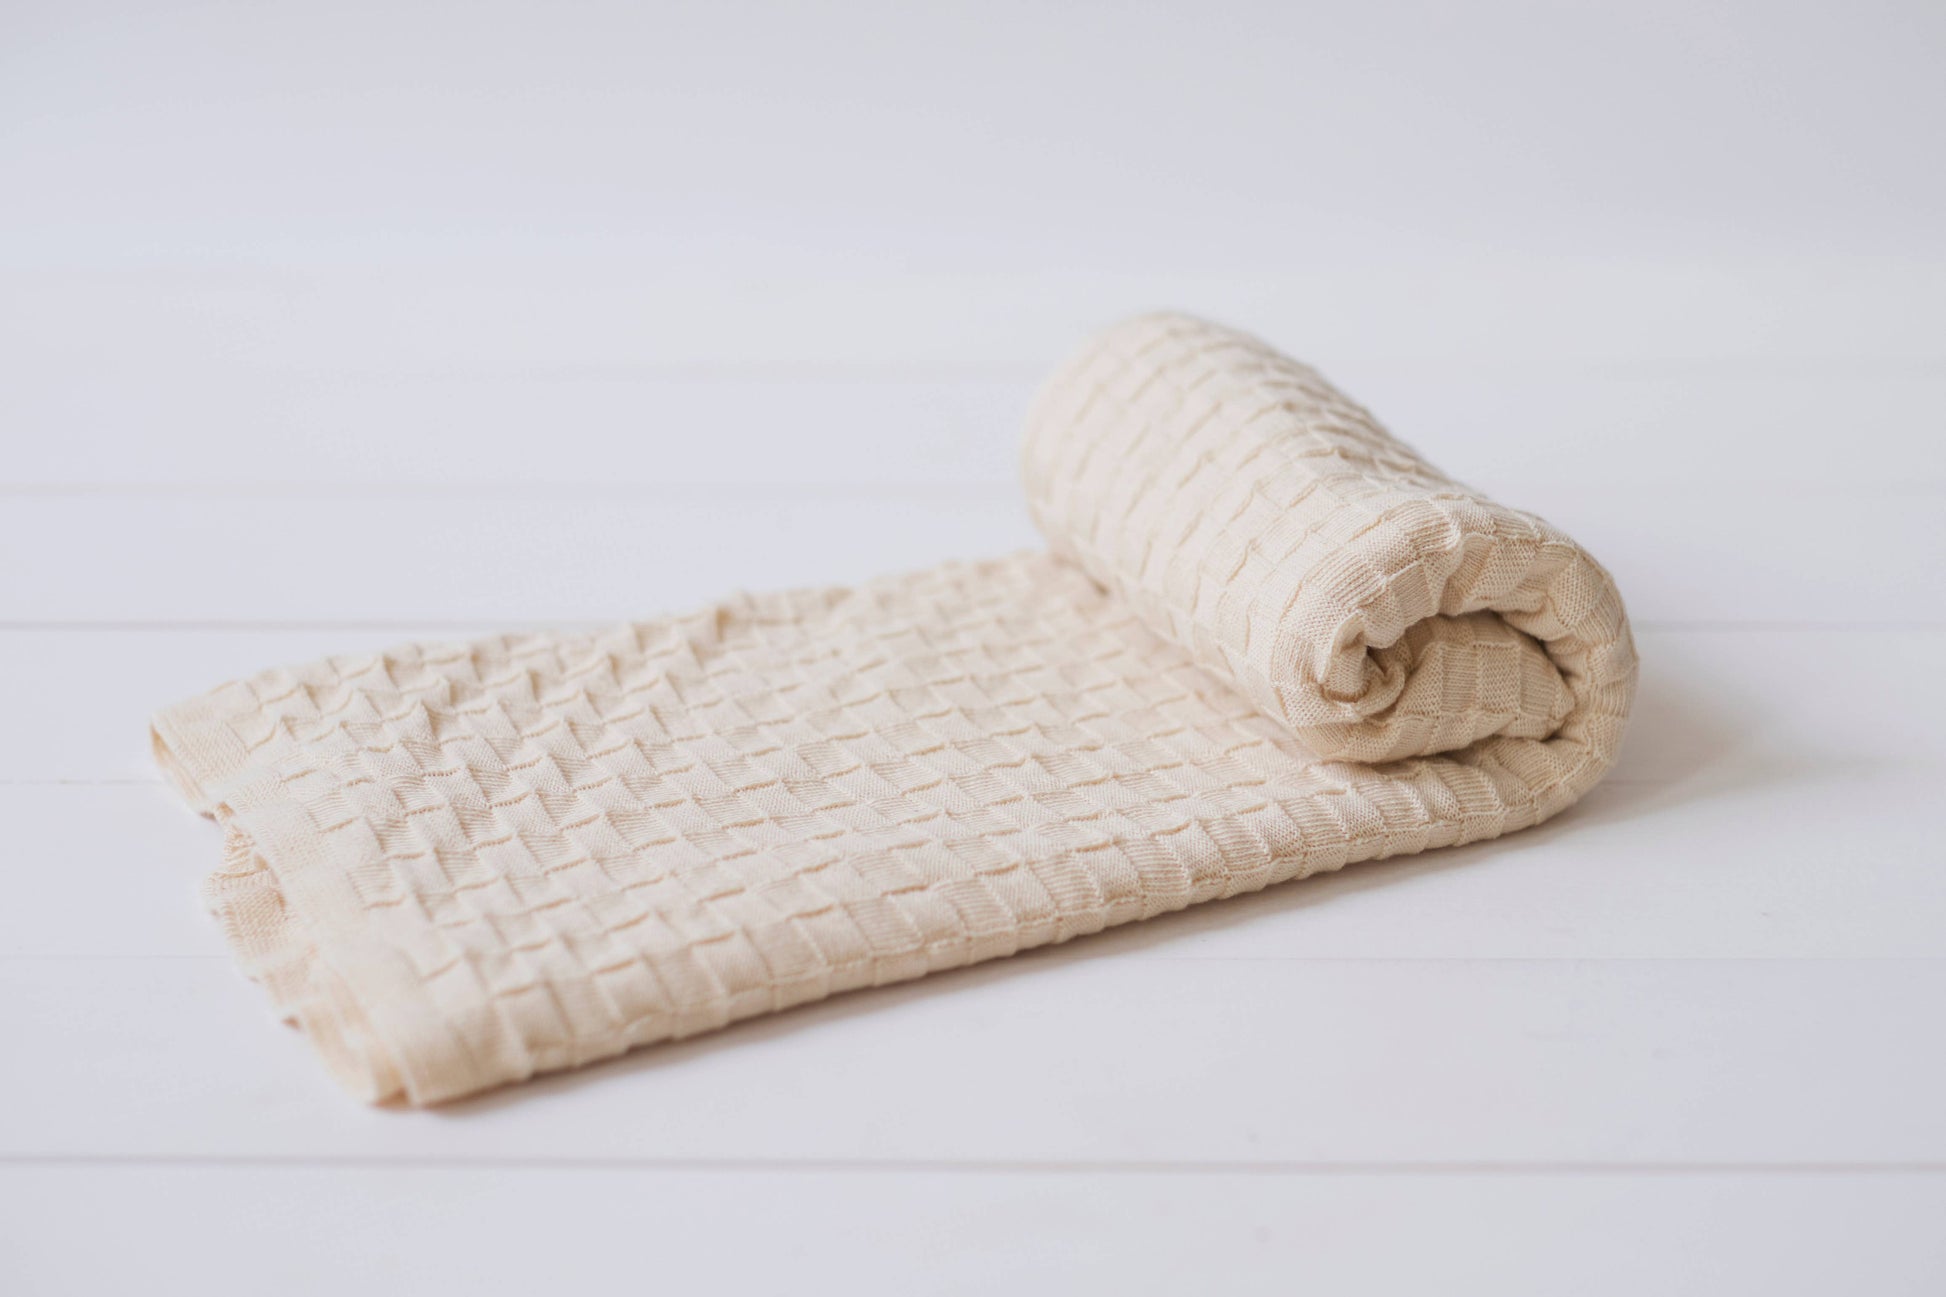 Organic Cotton Basketweave baby blanket unrolling to show pattern and Natural color